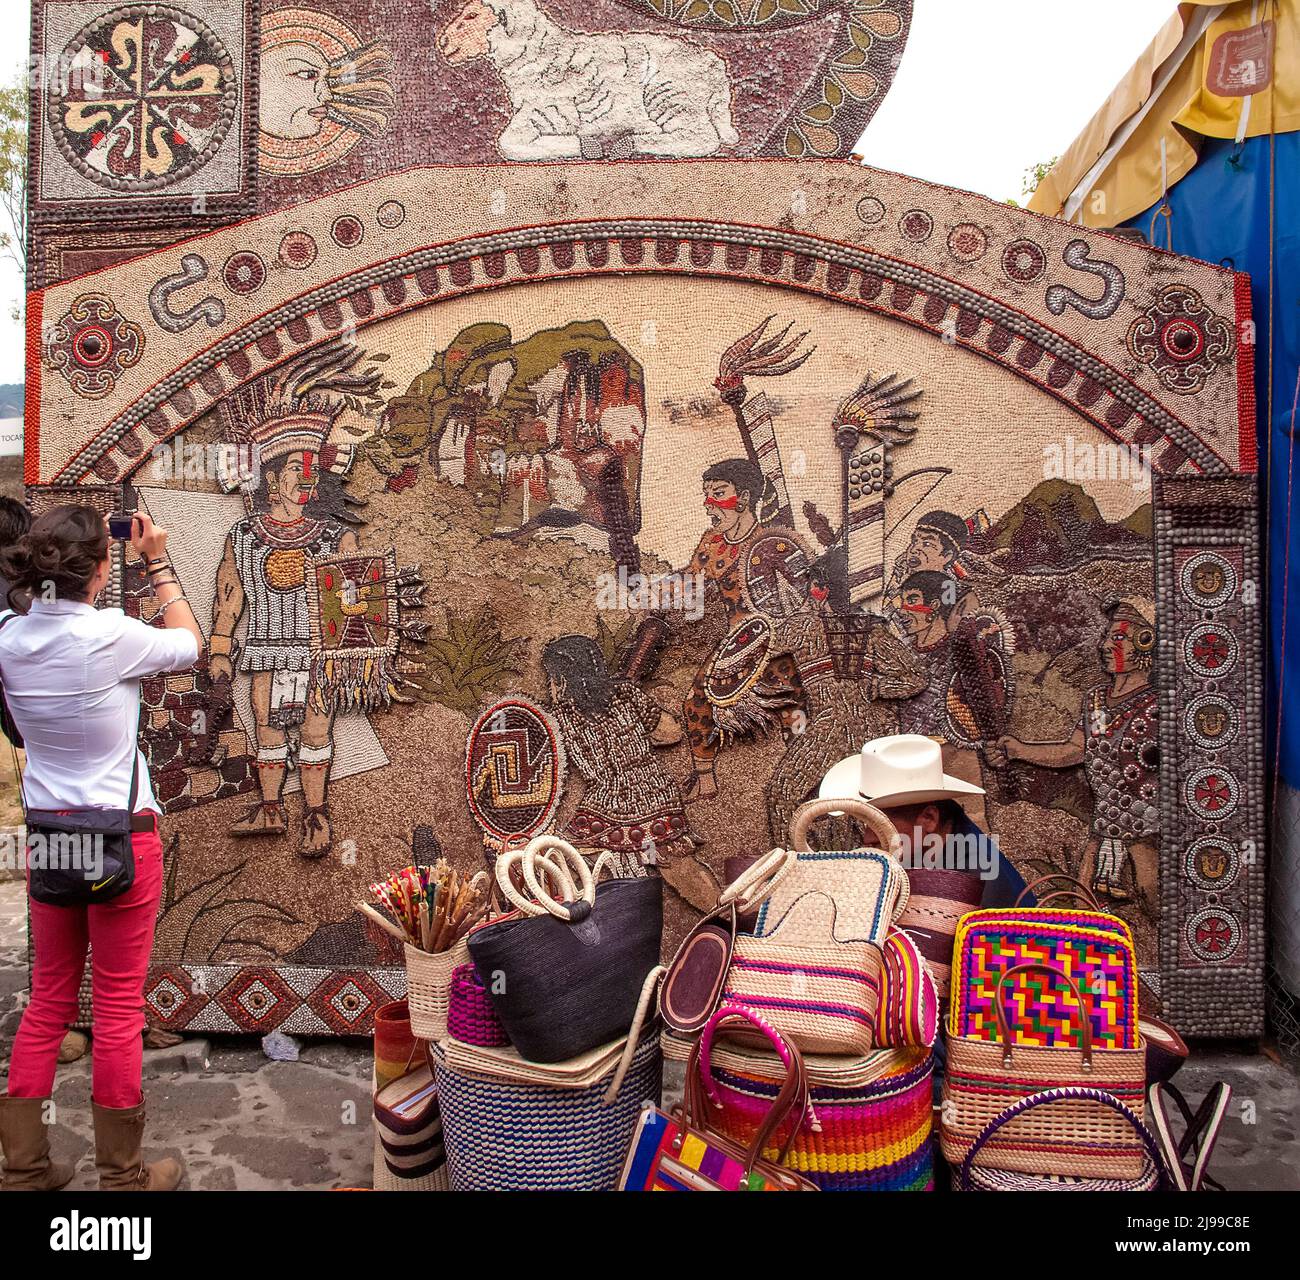 Mural made of seeds in Tepoztlan, Morelos, Mexico Stock Photo